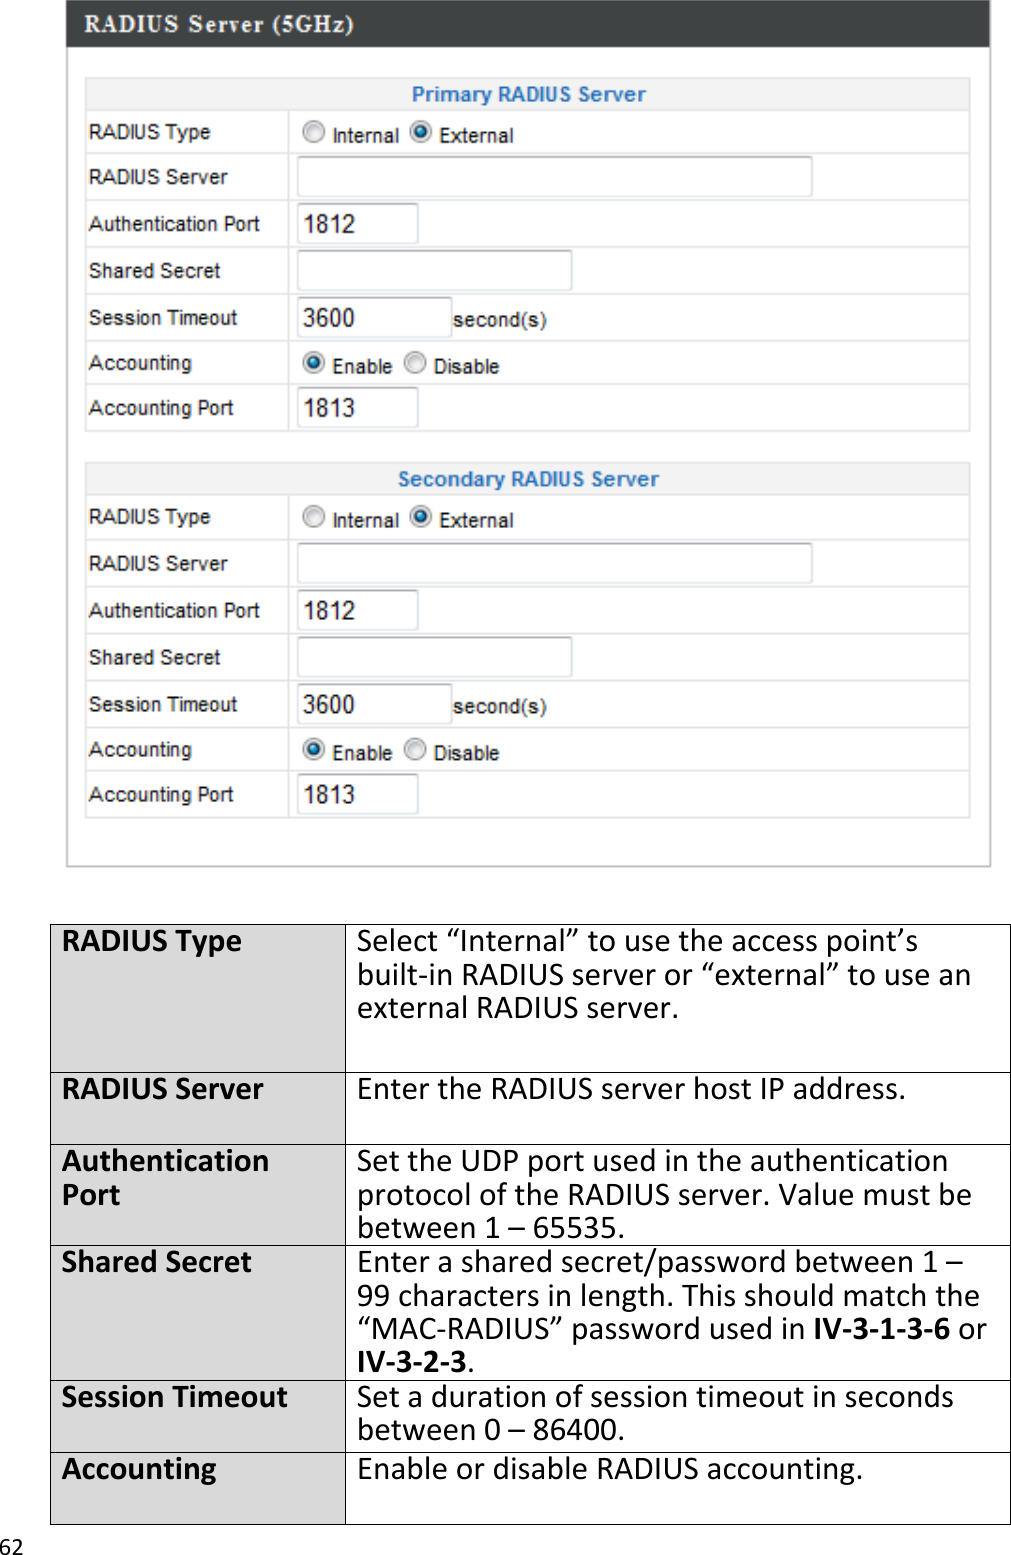 62RADIUSTypeSelect“Internal”tousetheaccesspoint’sbuilt‐inRADIUSserveror“external”touseanexternalRADIUSserver.RADIUSServerEntertheRADIUSserverhostIPaddress.AuthenticationPortSettheUDPportusedintheauthenticationprotocoloftheRADIUSserver.Valuemustbebetween1–65535.SharedSecretEnterasharedsecret/passwordbetween1–99charactersinlength.Thisshouldmatchthe“MAC‐RADIUS”passwordusedinIV‐3‐1‐3‐6orIV‐3‐2‐3.SessionTimeout Setadurationofsessiontimeoutinsecondsbetween0–86400.AccountingEnableordisableRADIUSaccounting.